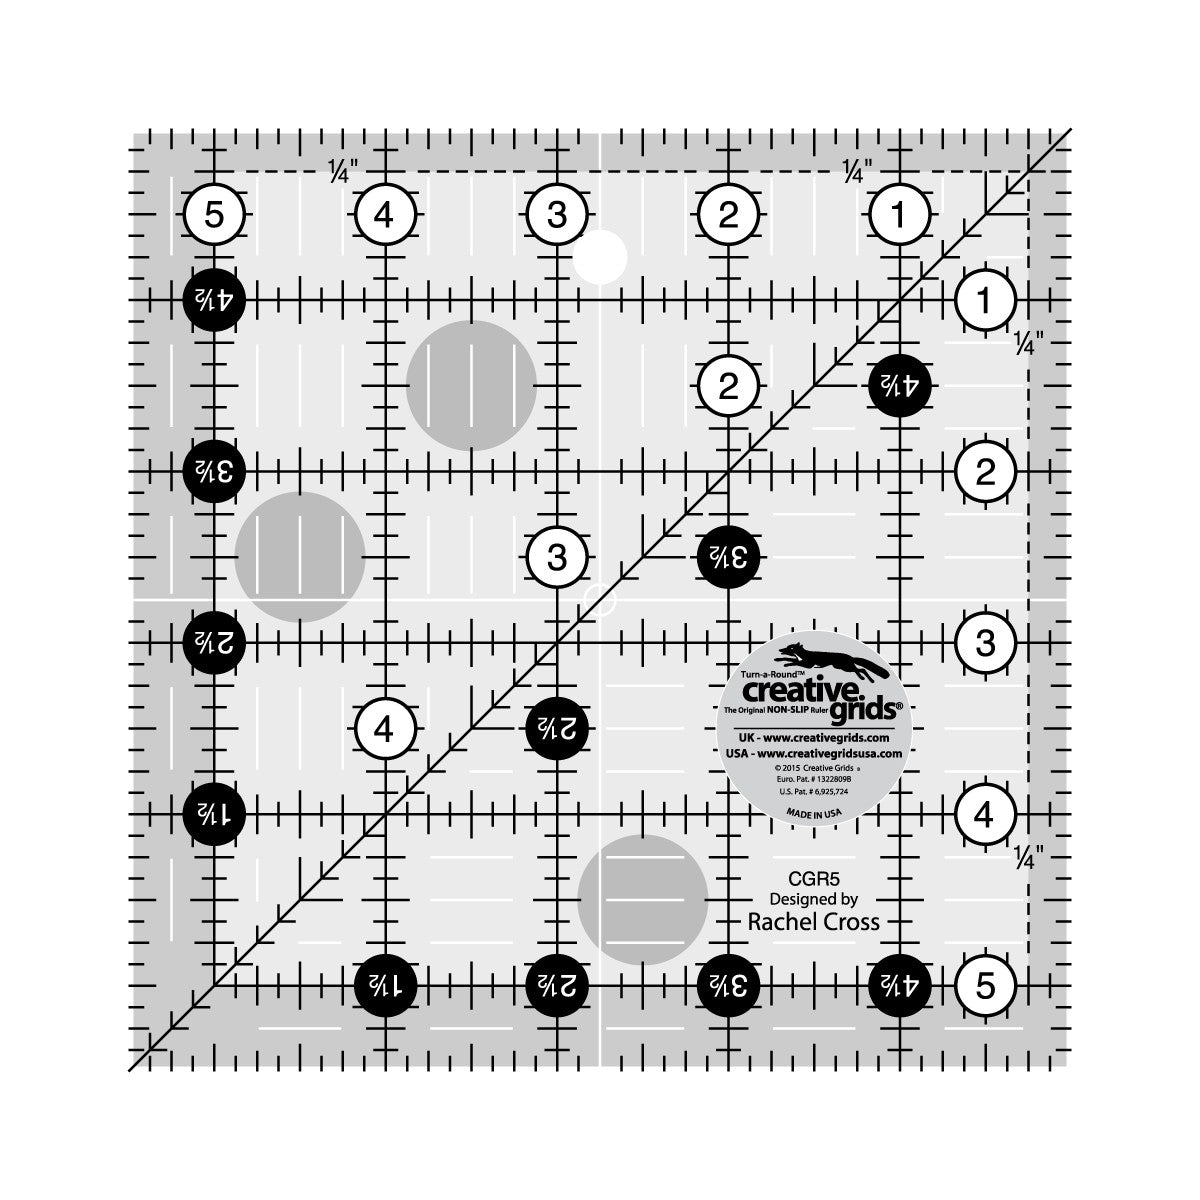 Creative Grids 18.5 Quilting Square Ruler, Creative Grids #CGR1818